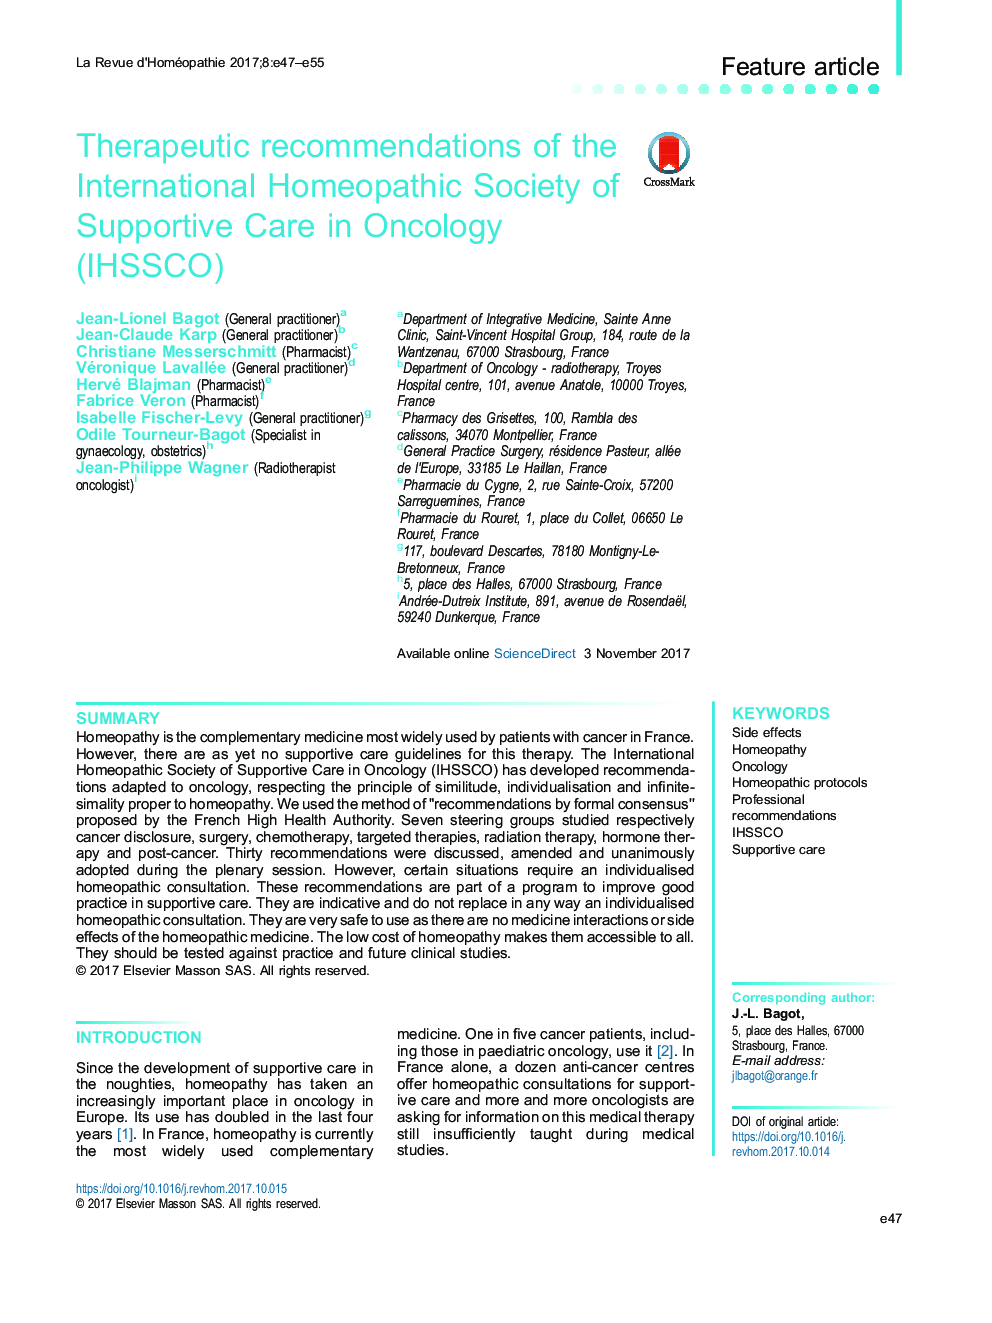 Therapeutic recommendations of the International Homeopathic Society of Supportive Care in Oncology (IHSSCO)